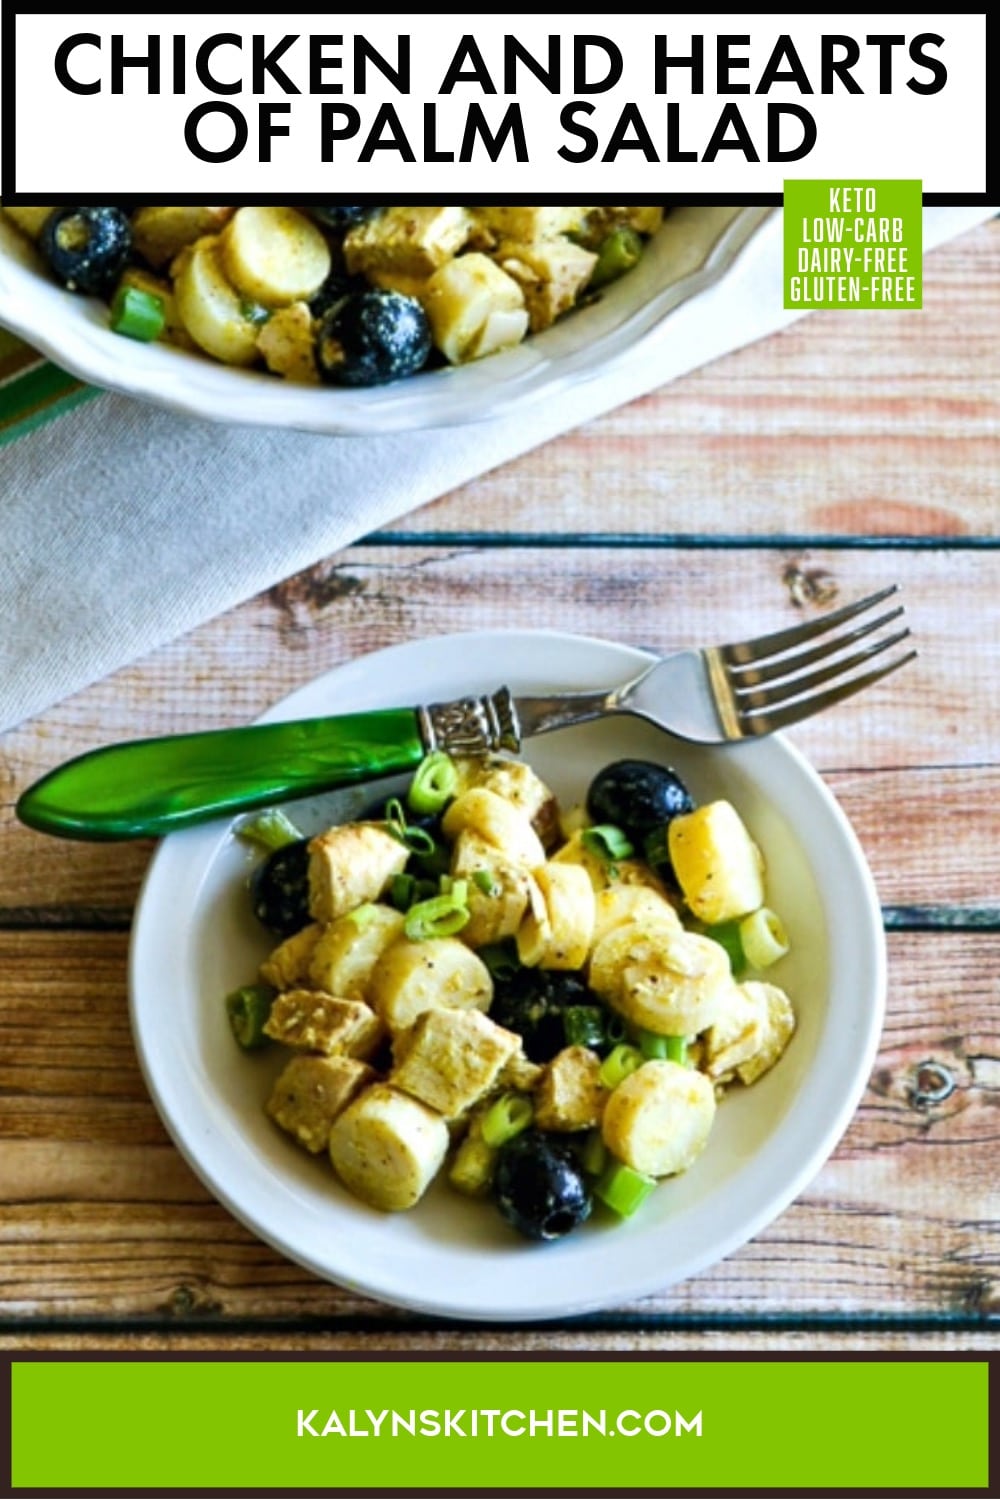 Pinterest image of Chicken and Hearts of Palm Salad